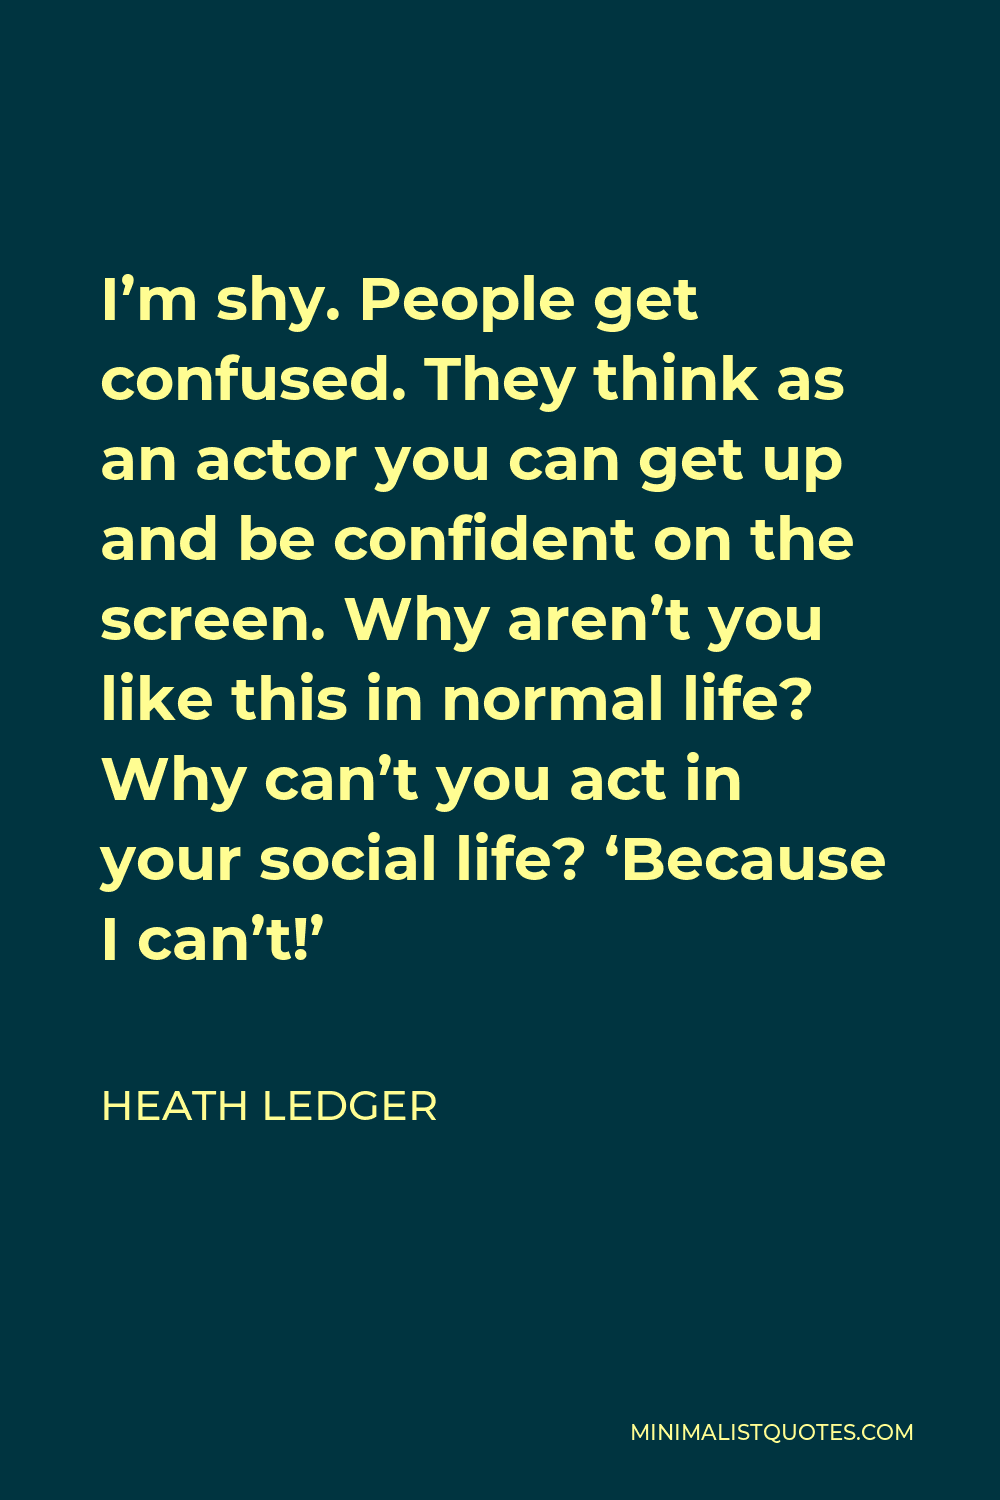 Heath Ledger Quote - I’m shy. People get confused. They think as an actor you can get up and be confident on the screen. Why aren’t you like this in normal life? Why can’t you act in your social life? ‘Because I can’t!’